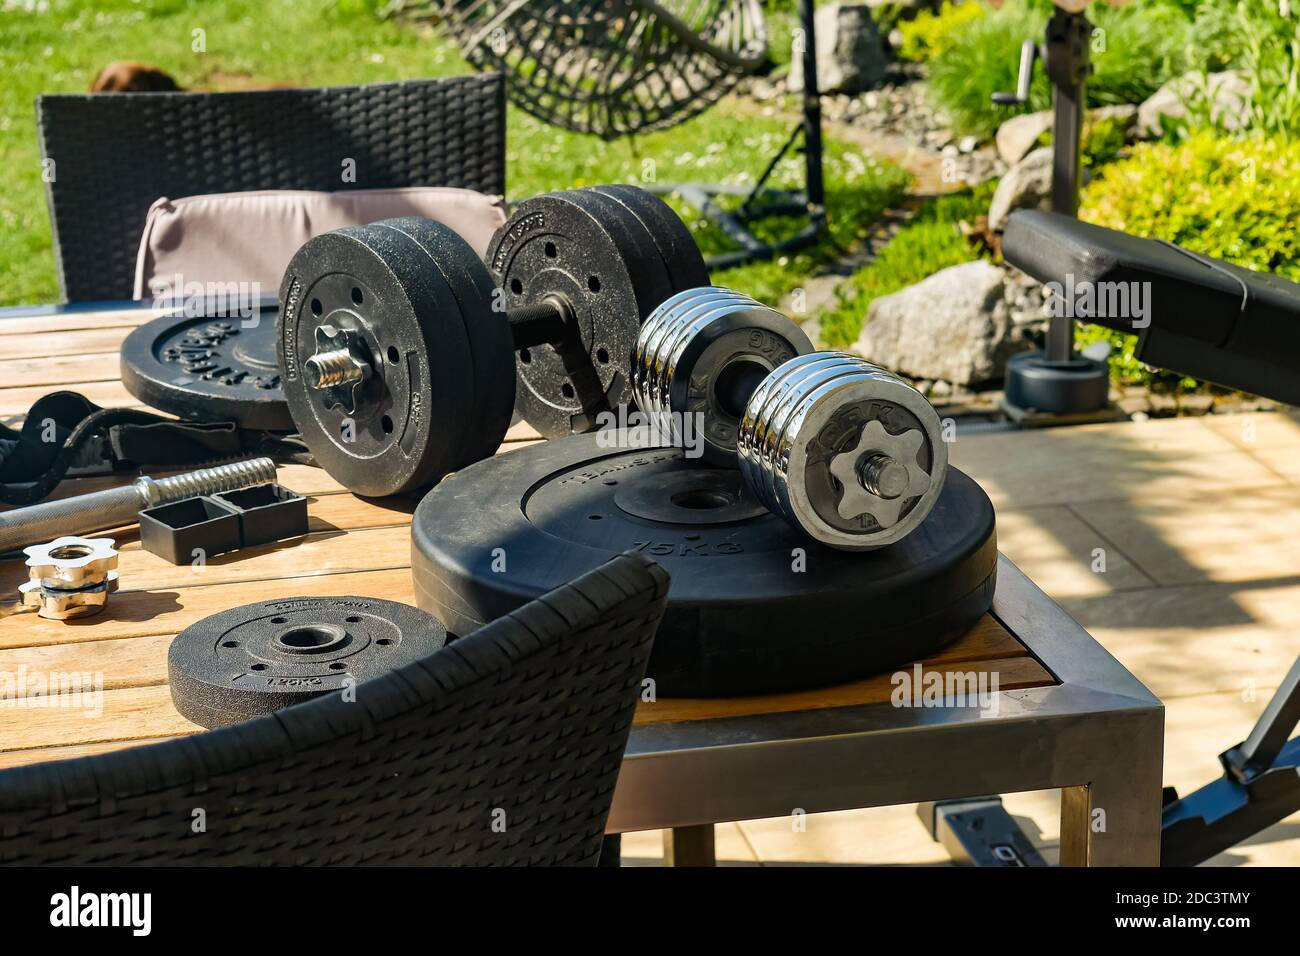 Exercise weights and adjustable dumbbells on outdoor table. High angle view. Stock Photo